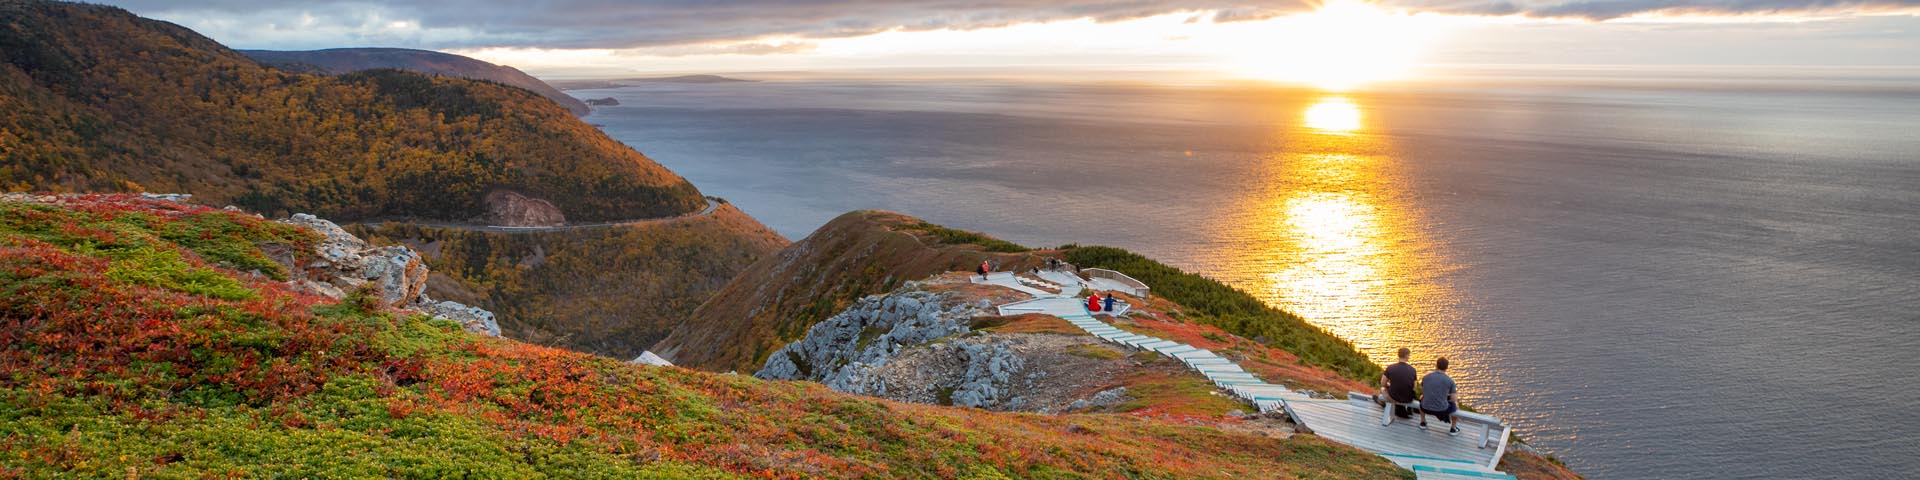 Visitors at the Skyline Trail lookouts at sunset, in Cape Breton Highlands National Park.